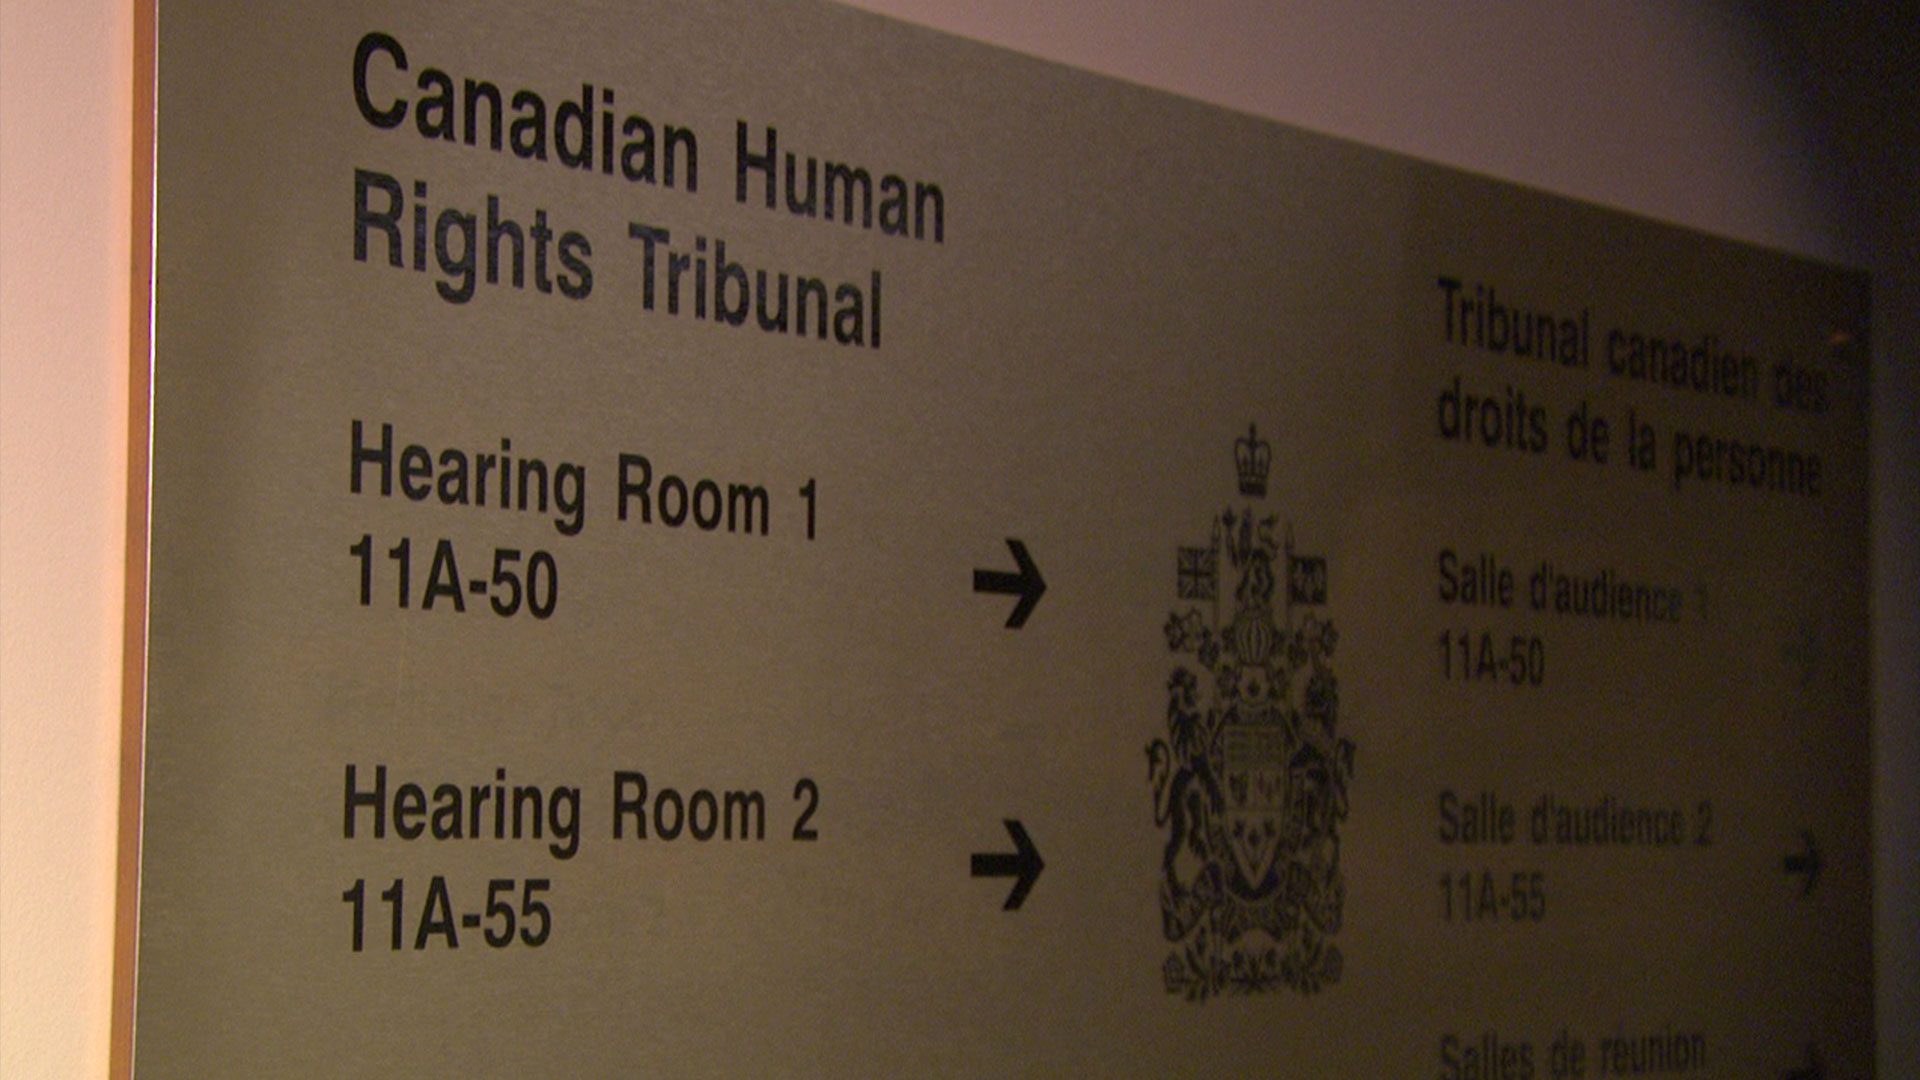 Canada, Manitoba point fingers at each other in response to off-reserve child welfare lawsuit